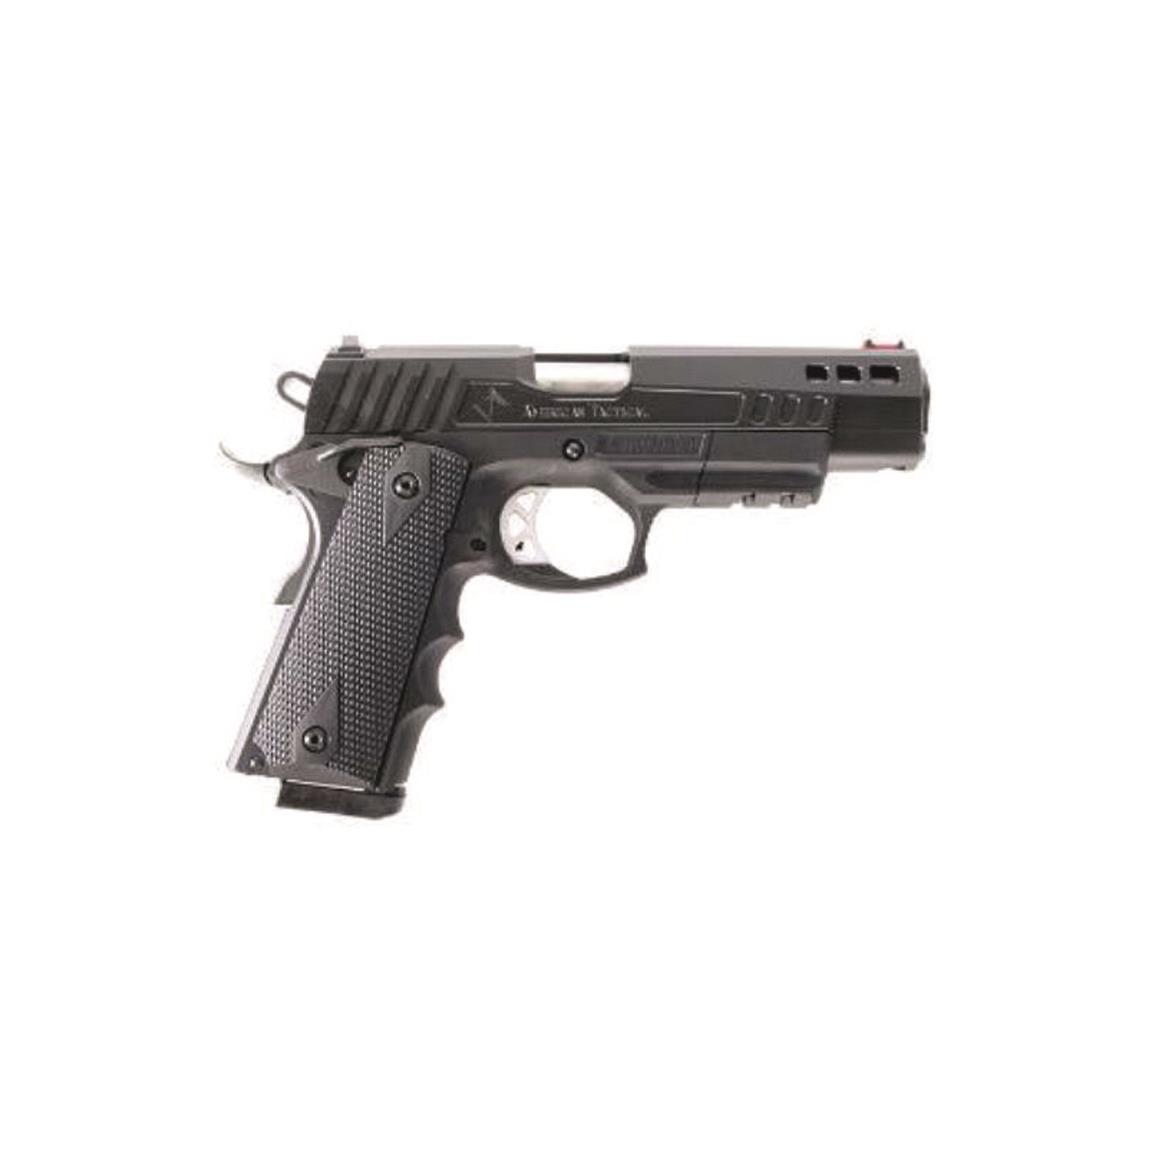 ATI FXH-45 1911, Semi-Automatic, .45 ACP, 5" Stainless Barrel, Polymer Frame, 8+1 Rounds